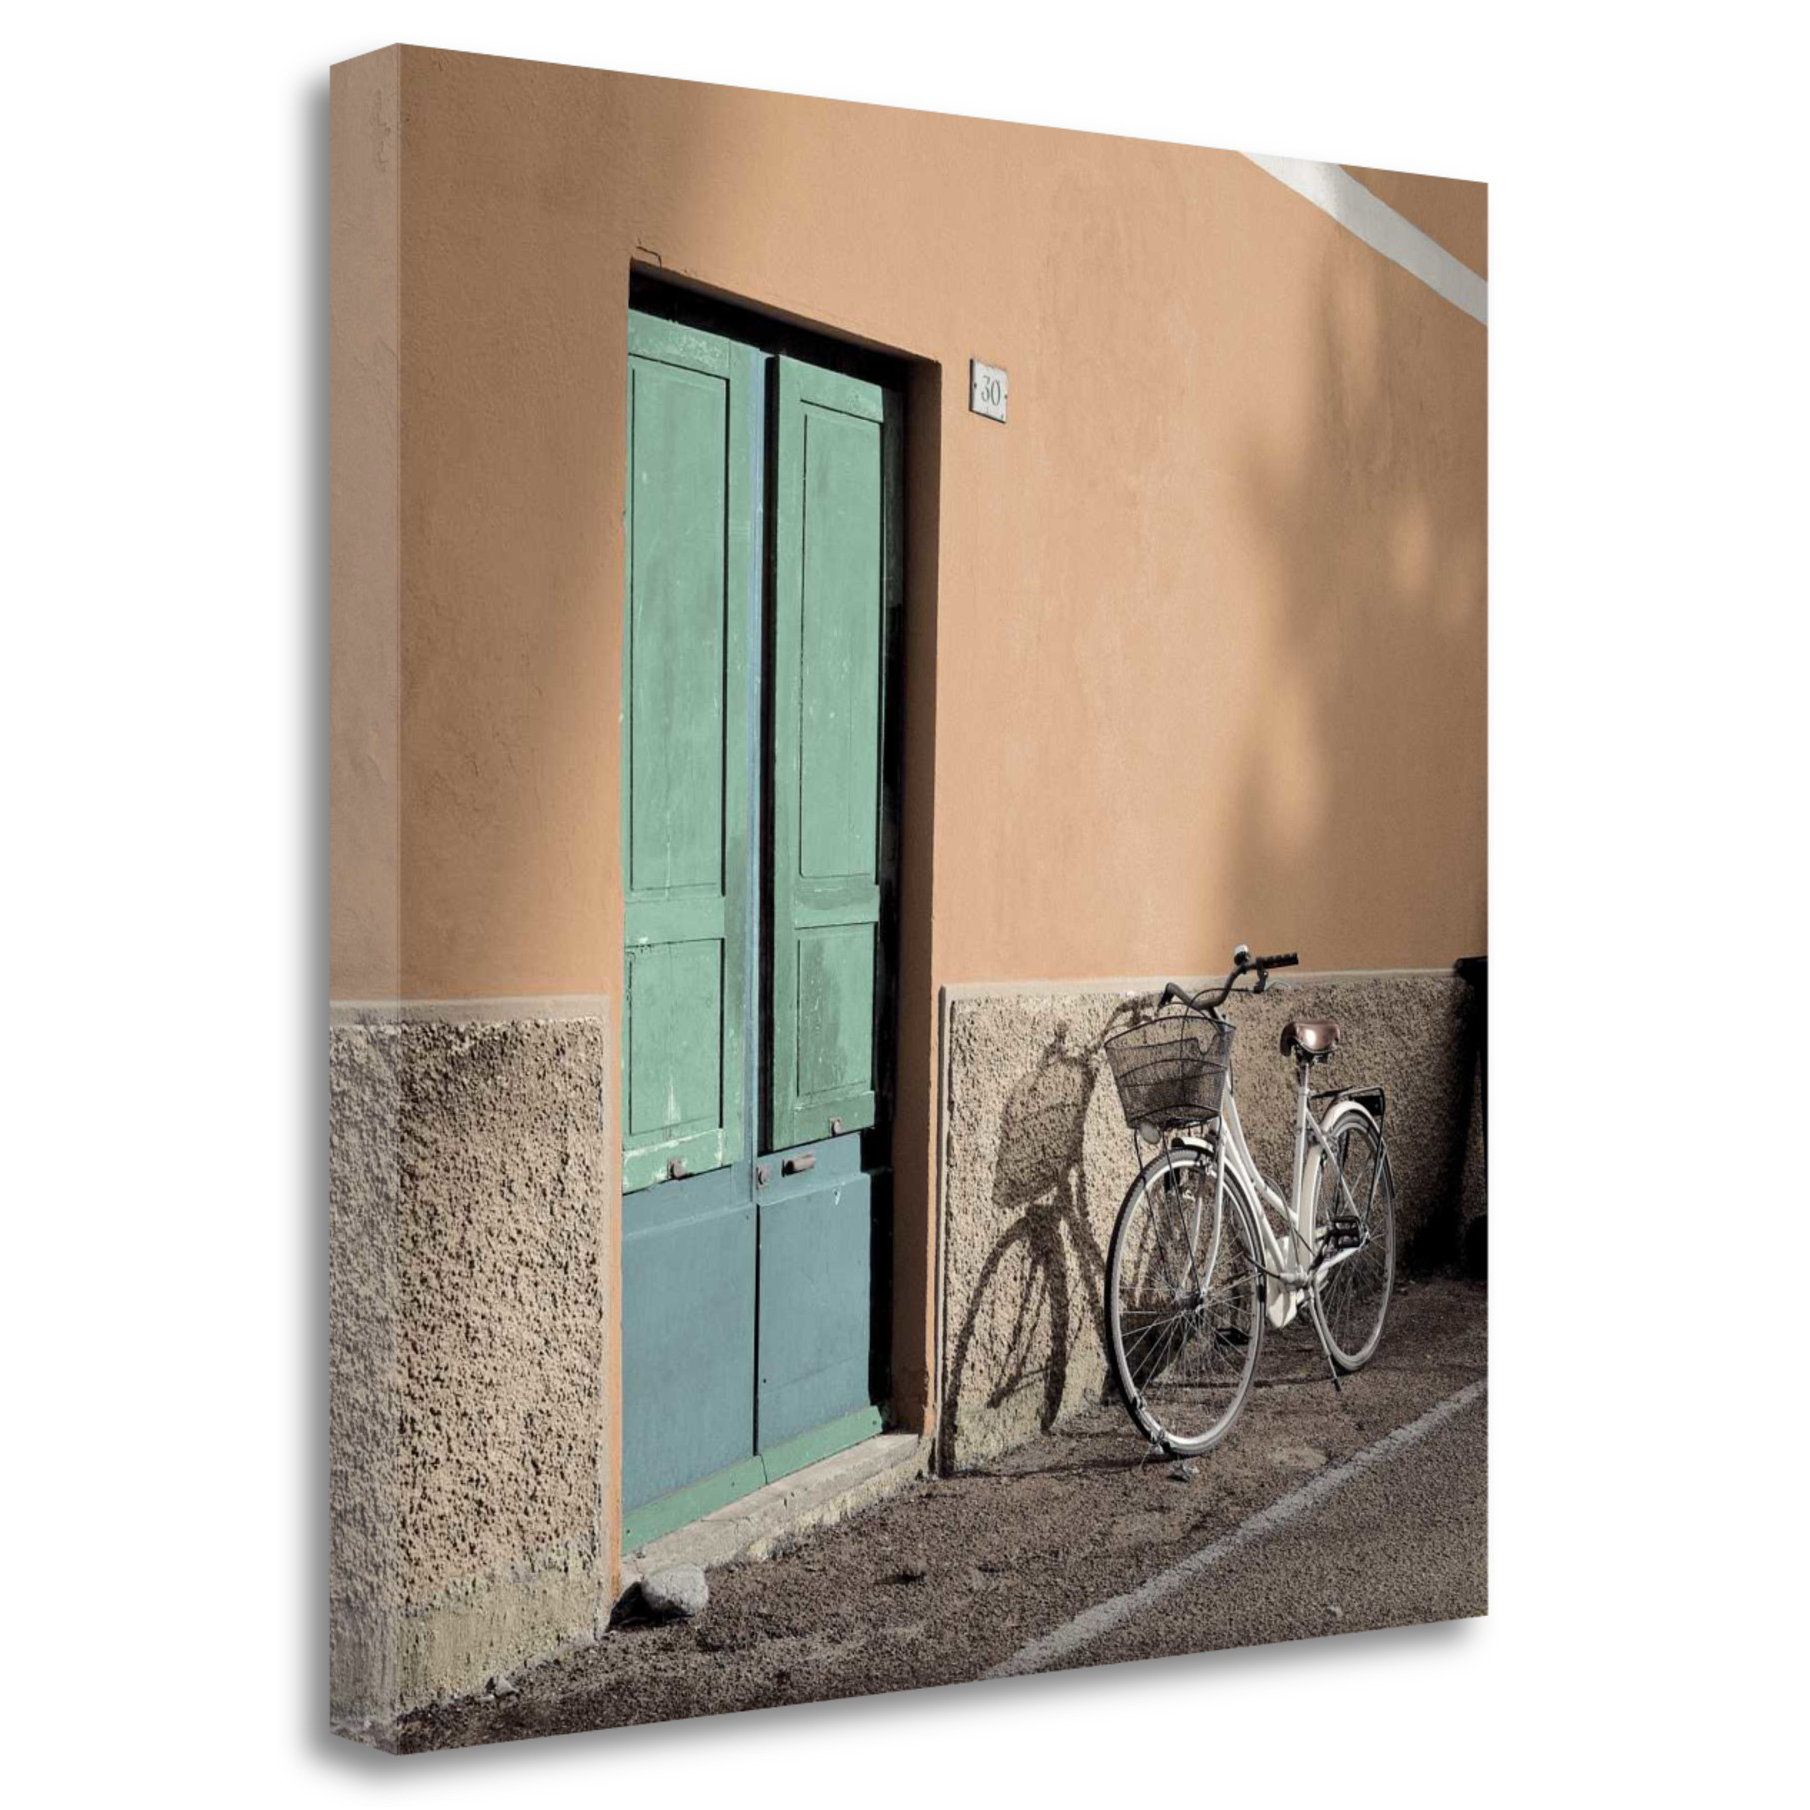 Liguria Bicycle - 1 by Alan Blaustein - Wrapped Canvas Print